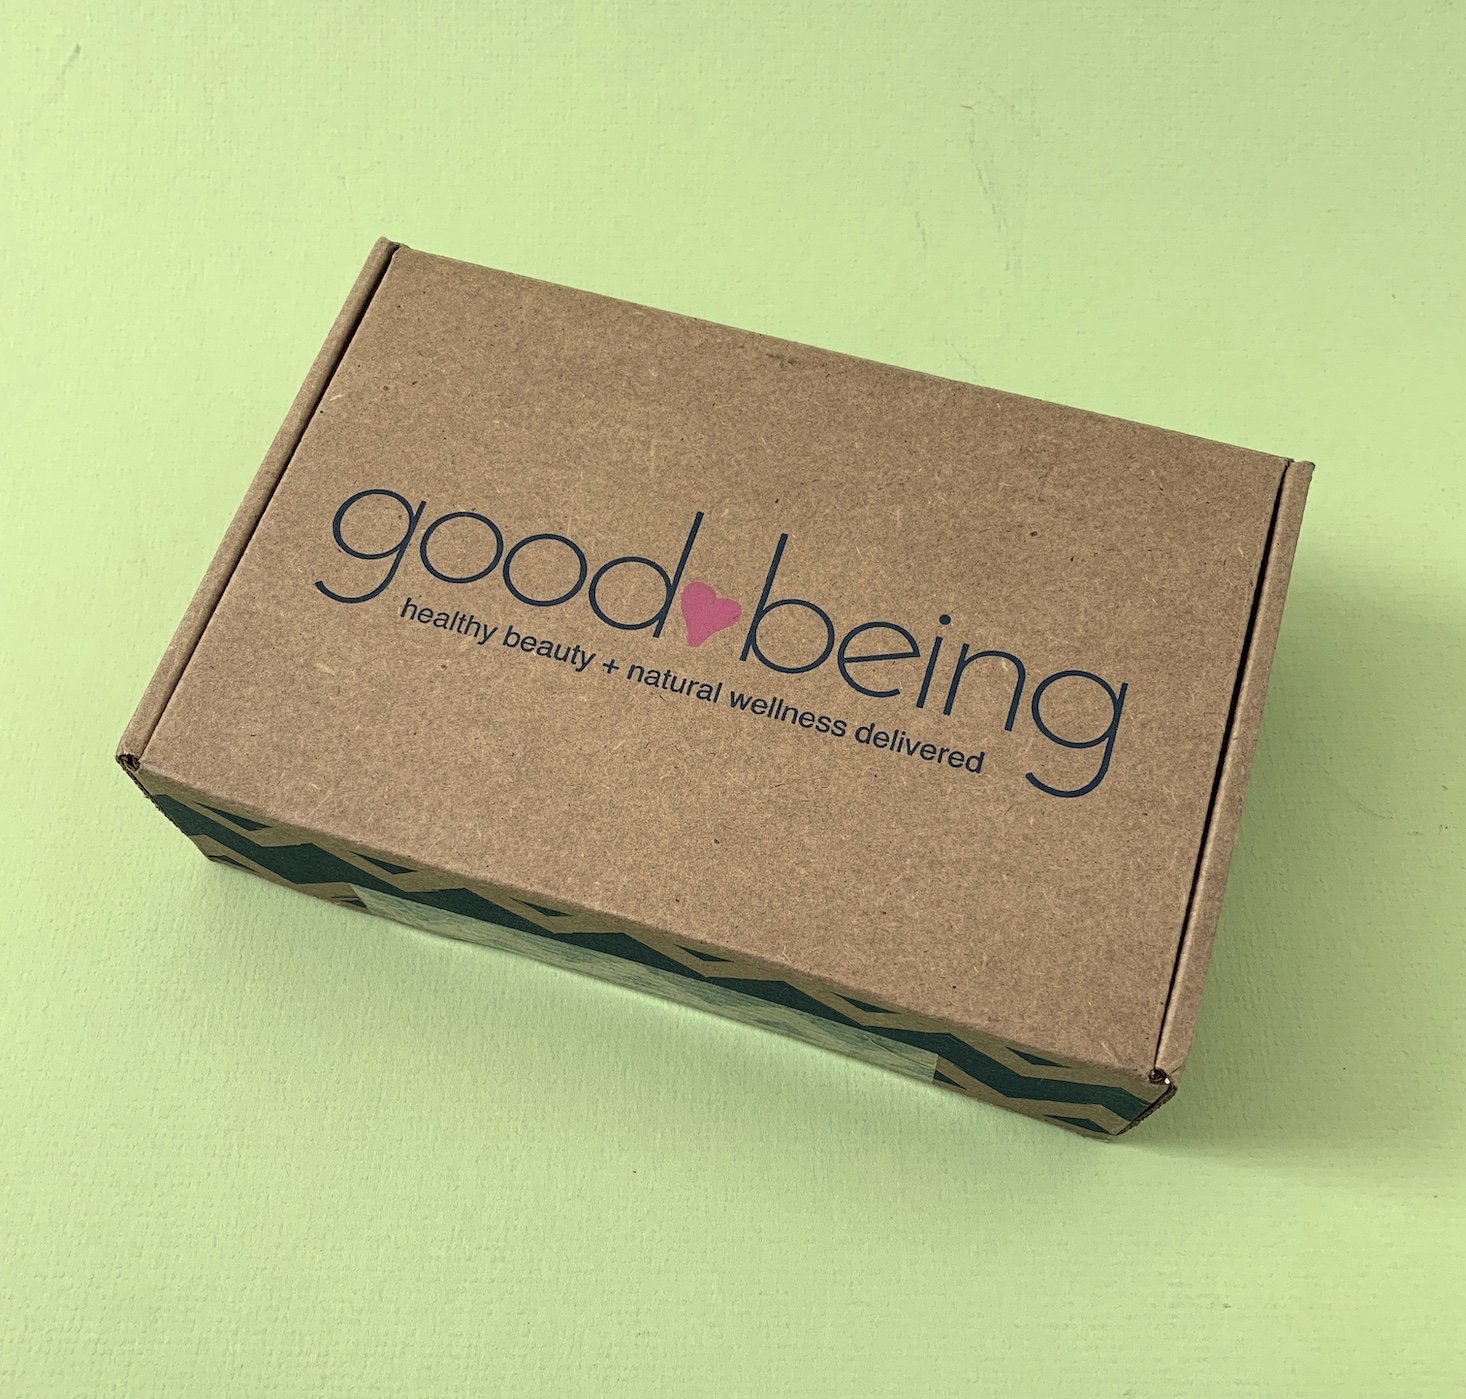 GoodBeing Box Subscription Review + Coupon – February 2019